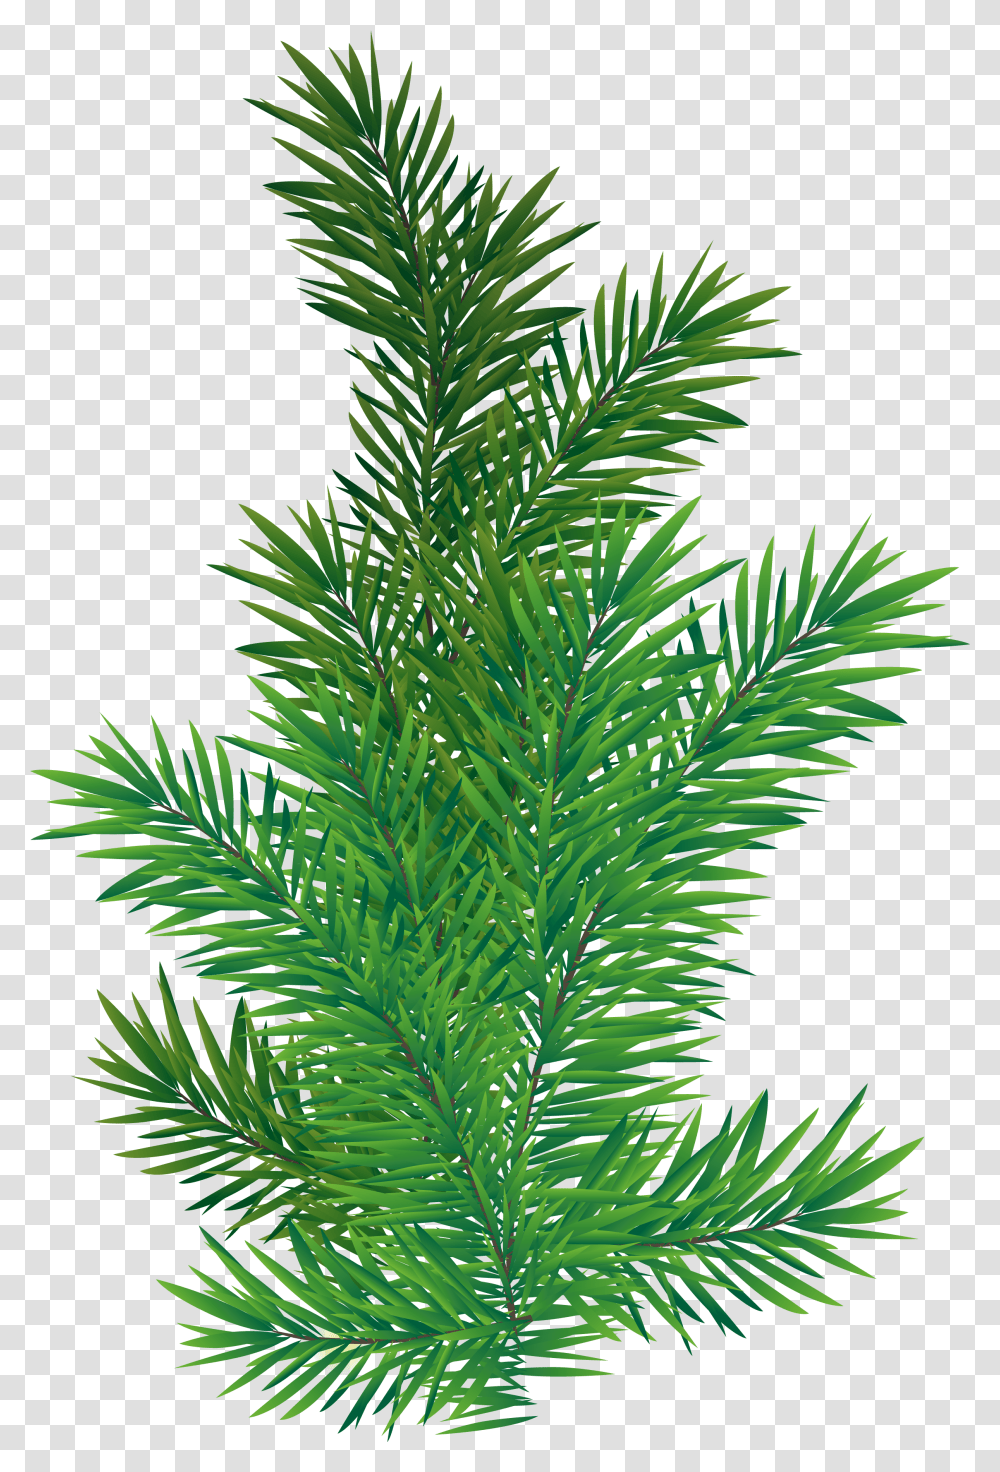 Pine Branch Picture Background Pine Tree Branch, Plant, Conifer, Fir, Abies Transparent Png